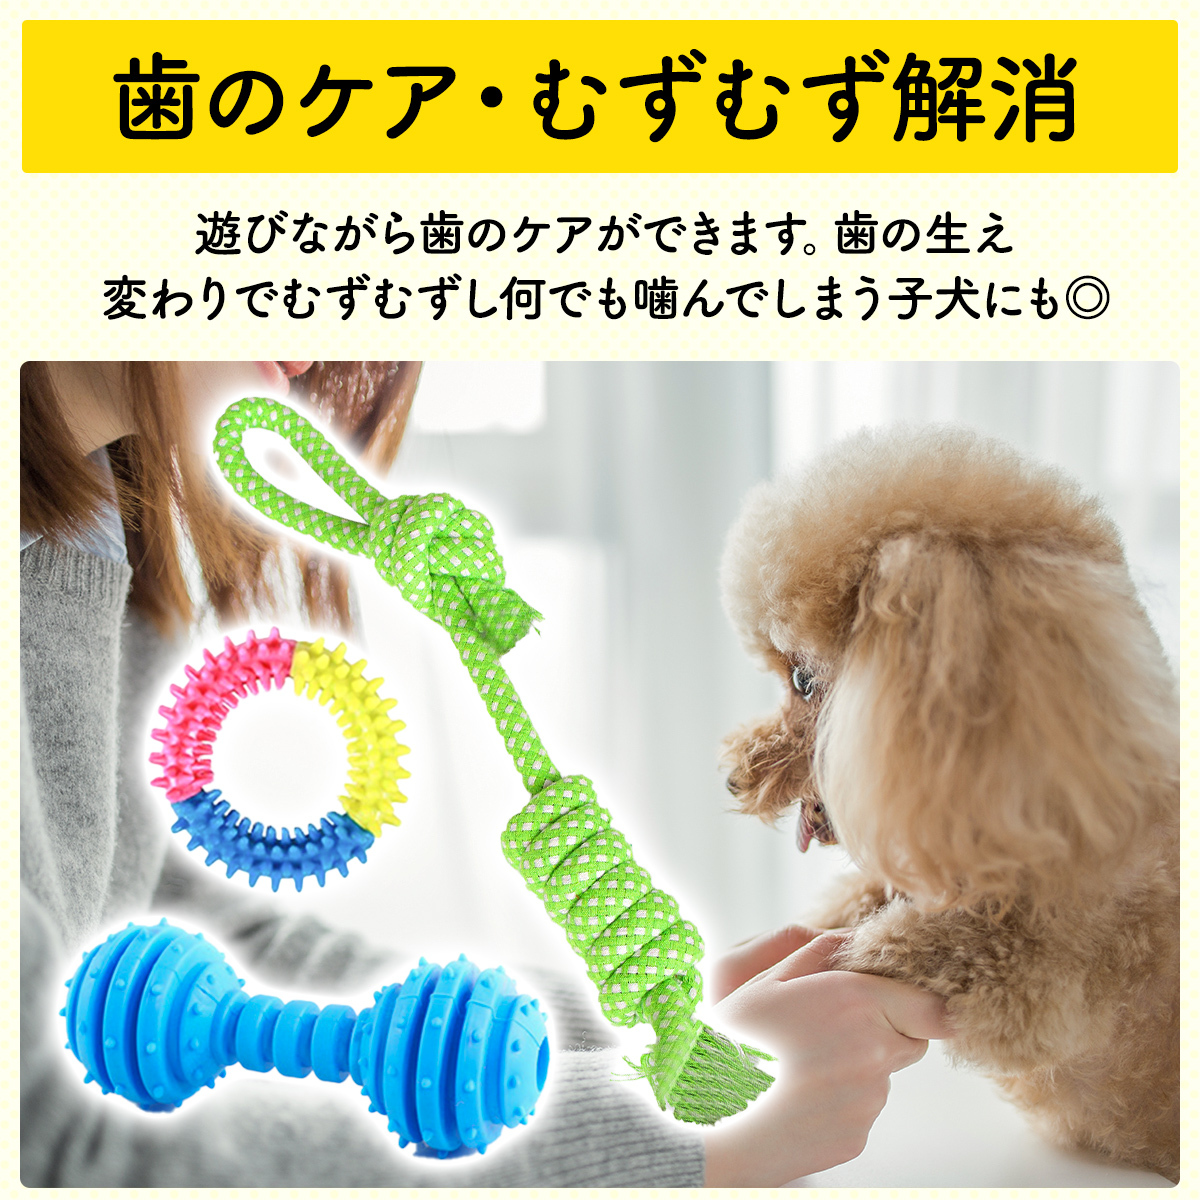  dog toy toy pet -stroke less cancellation brush teeth .. dental care 